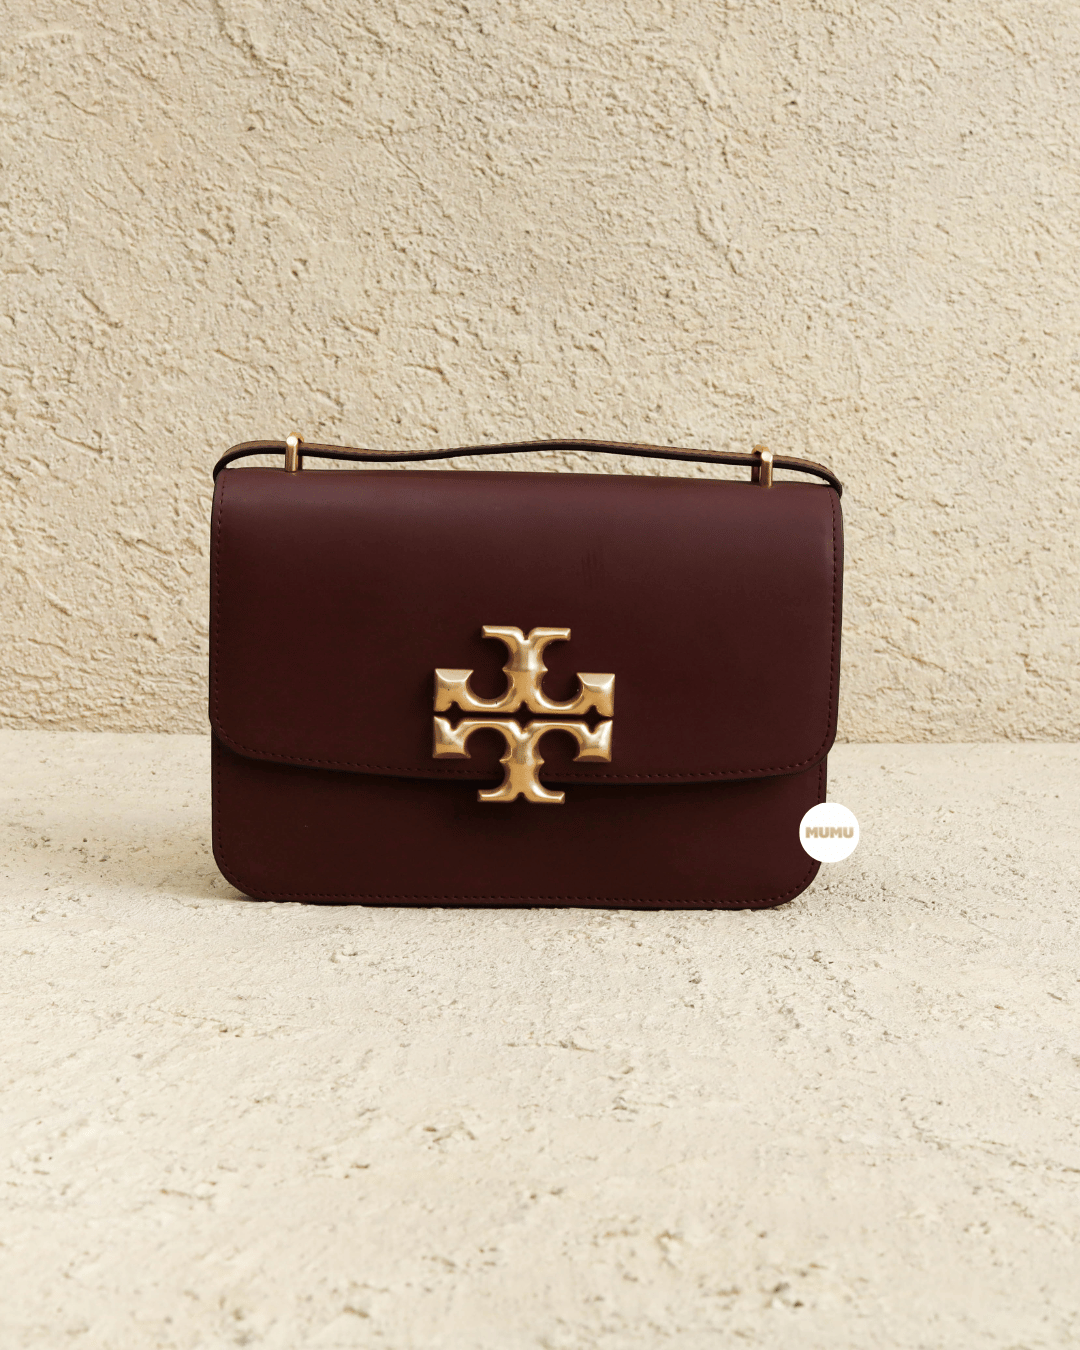 Tory Burch Eleanor Small Canvas & Leather Convertible Shoulder Bag In  Kobicha